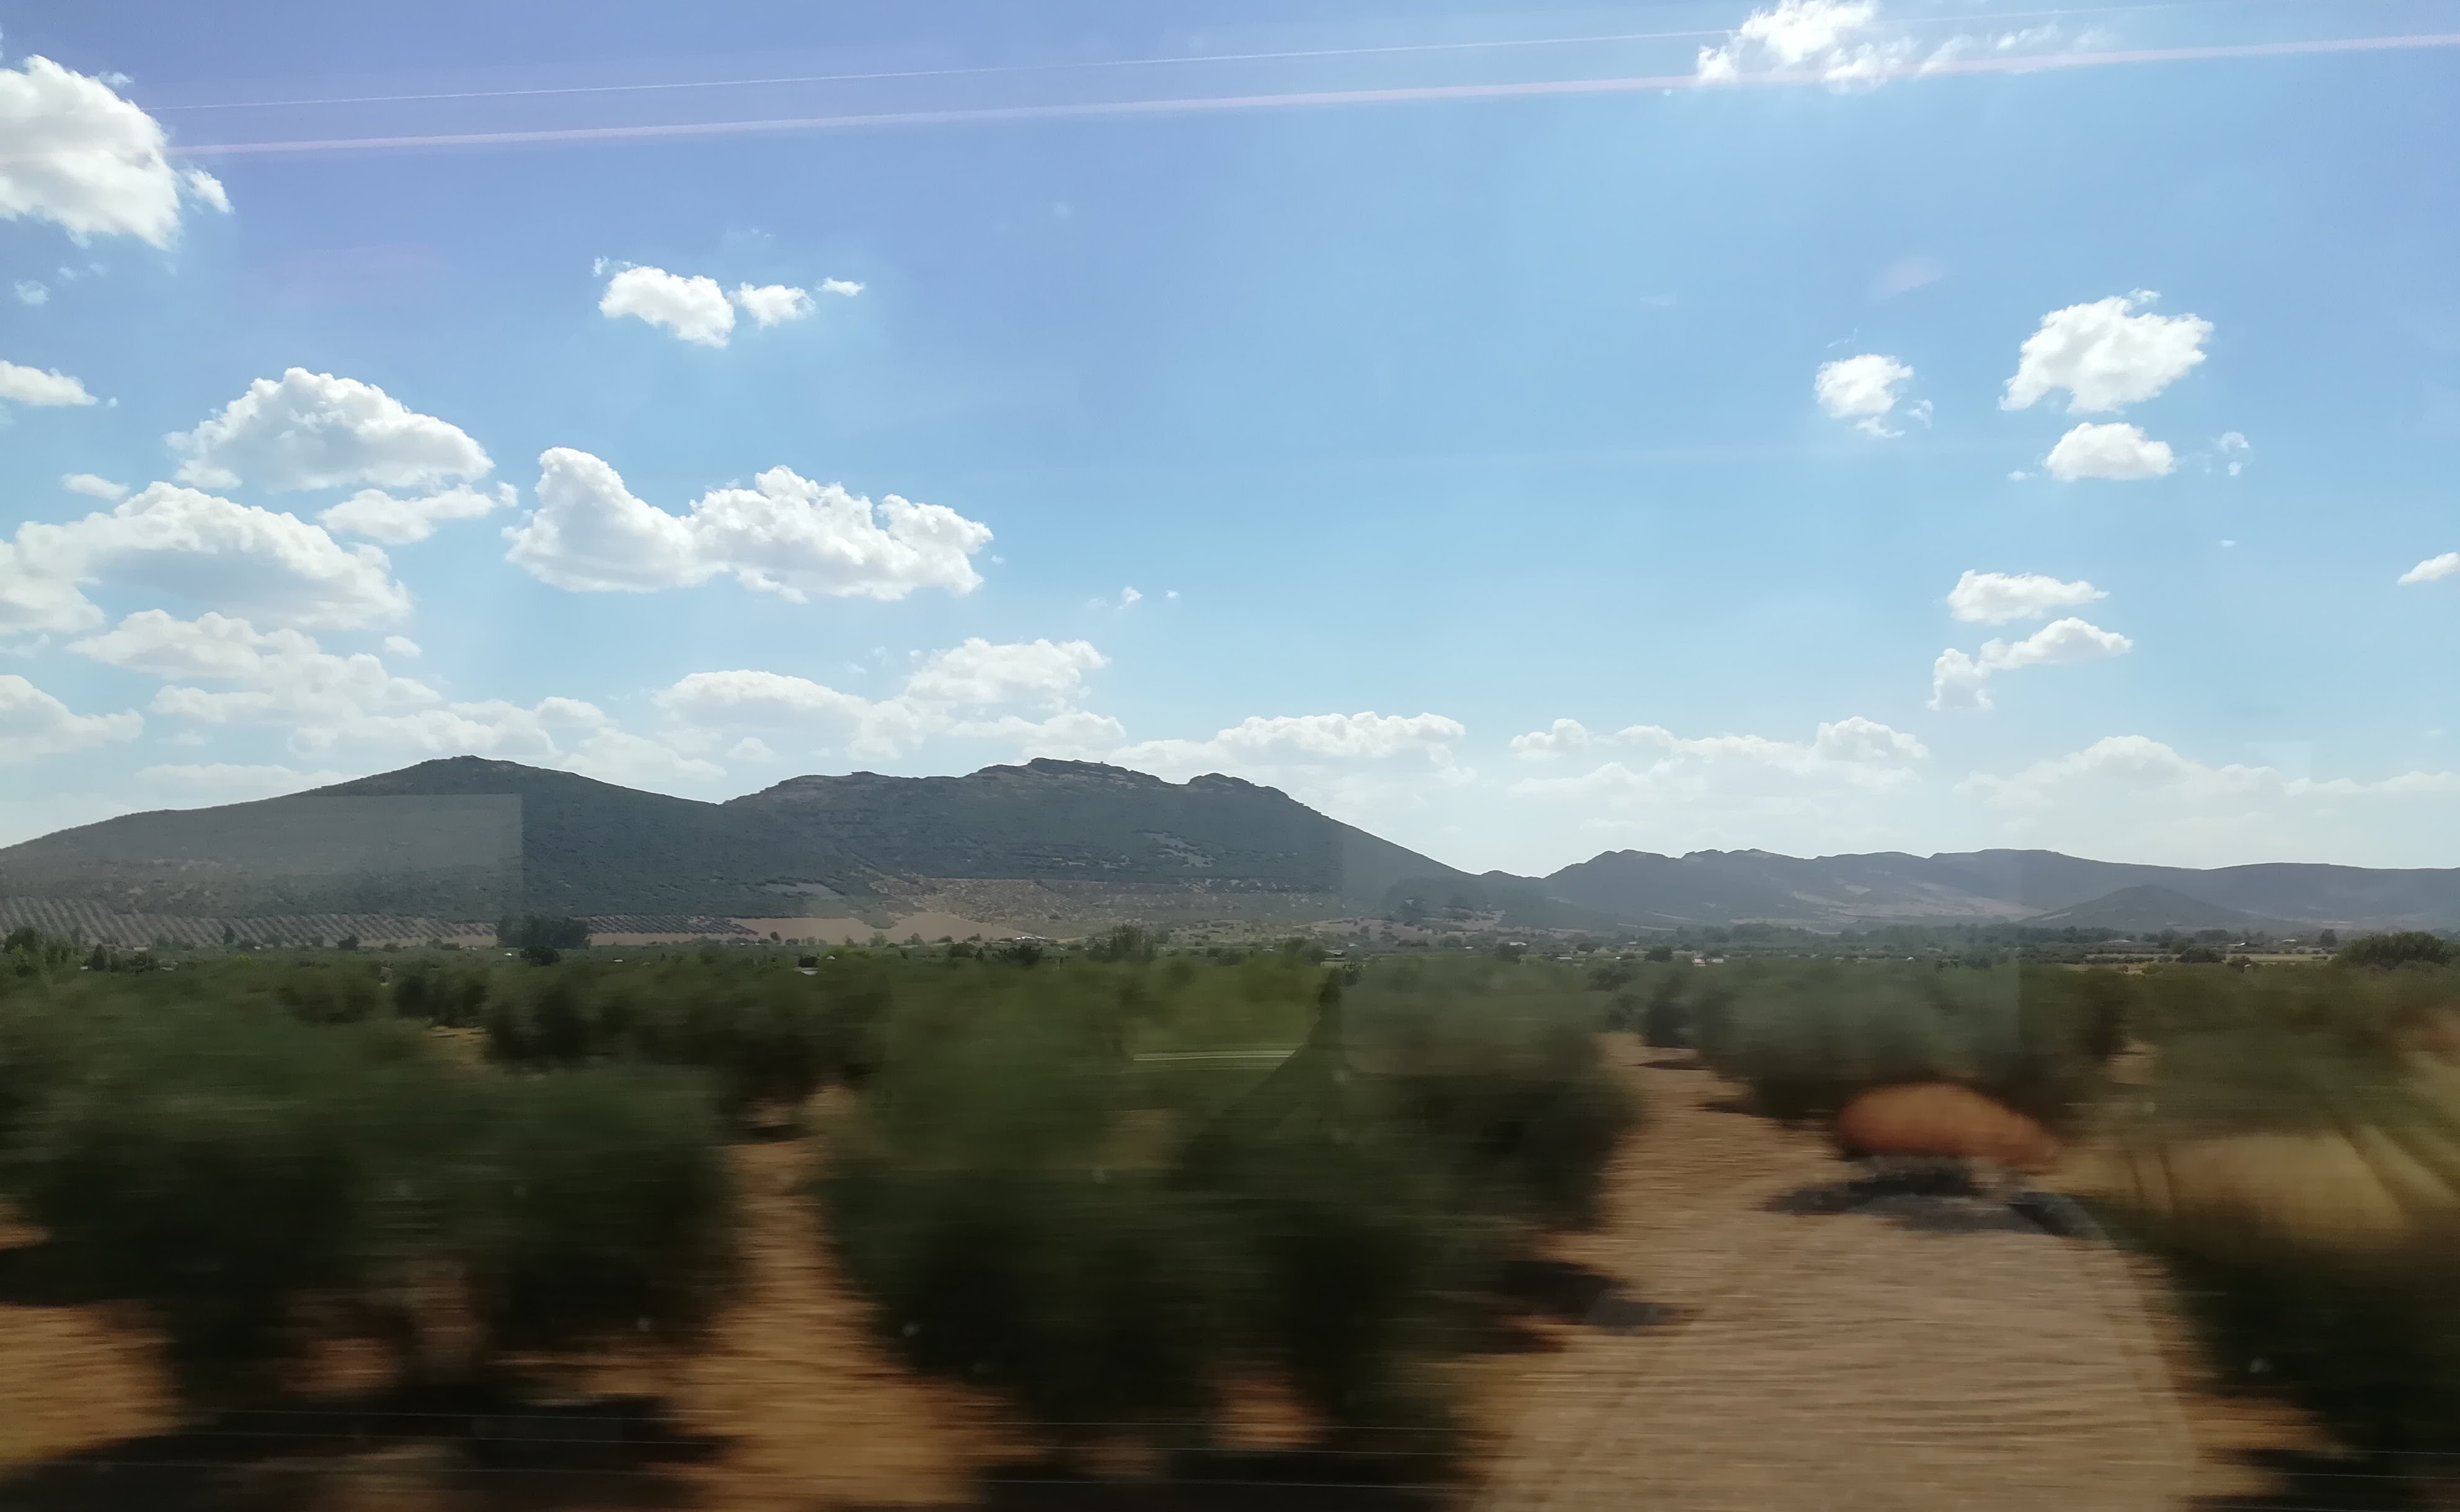 Spanish countryside from the train at 300km/h